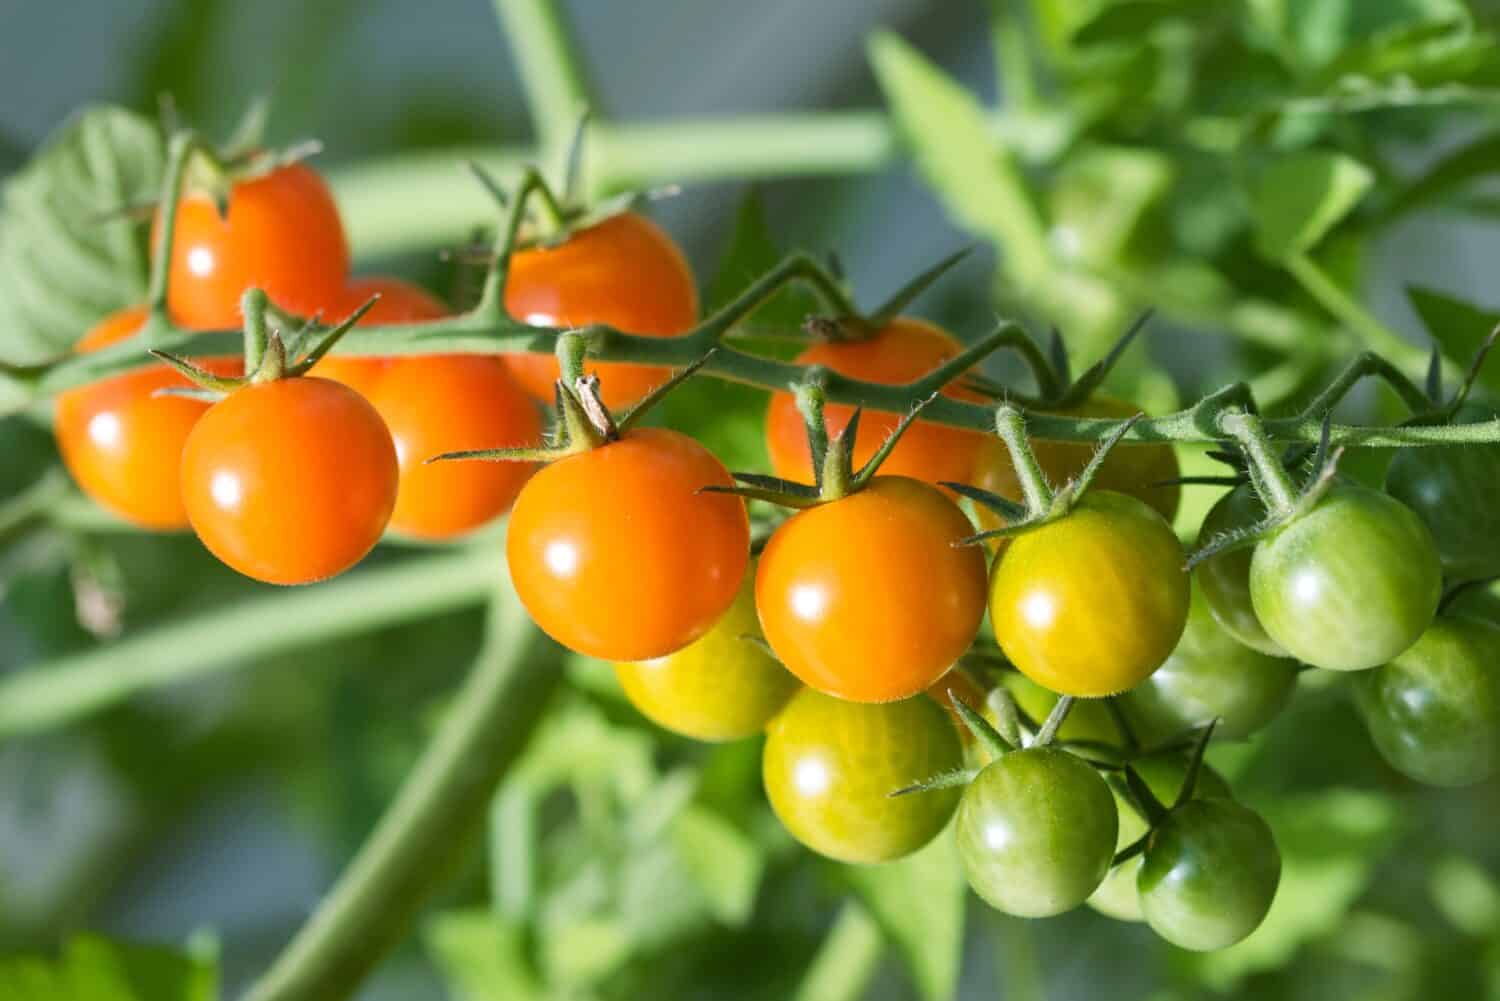 Cherry tomatoes of Sungold variety texture close up, ripening golden ond orange colored fruits growing in clusters on hairy vines in an organic summer garden in the sunlight